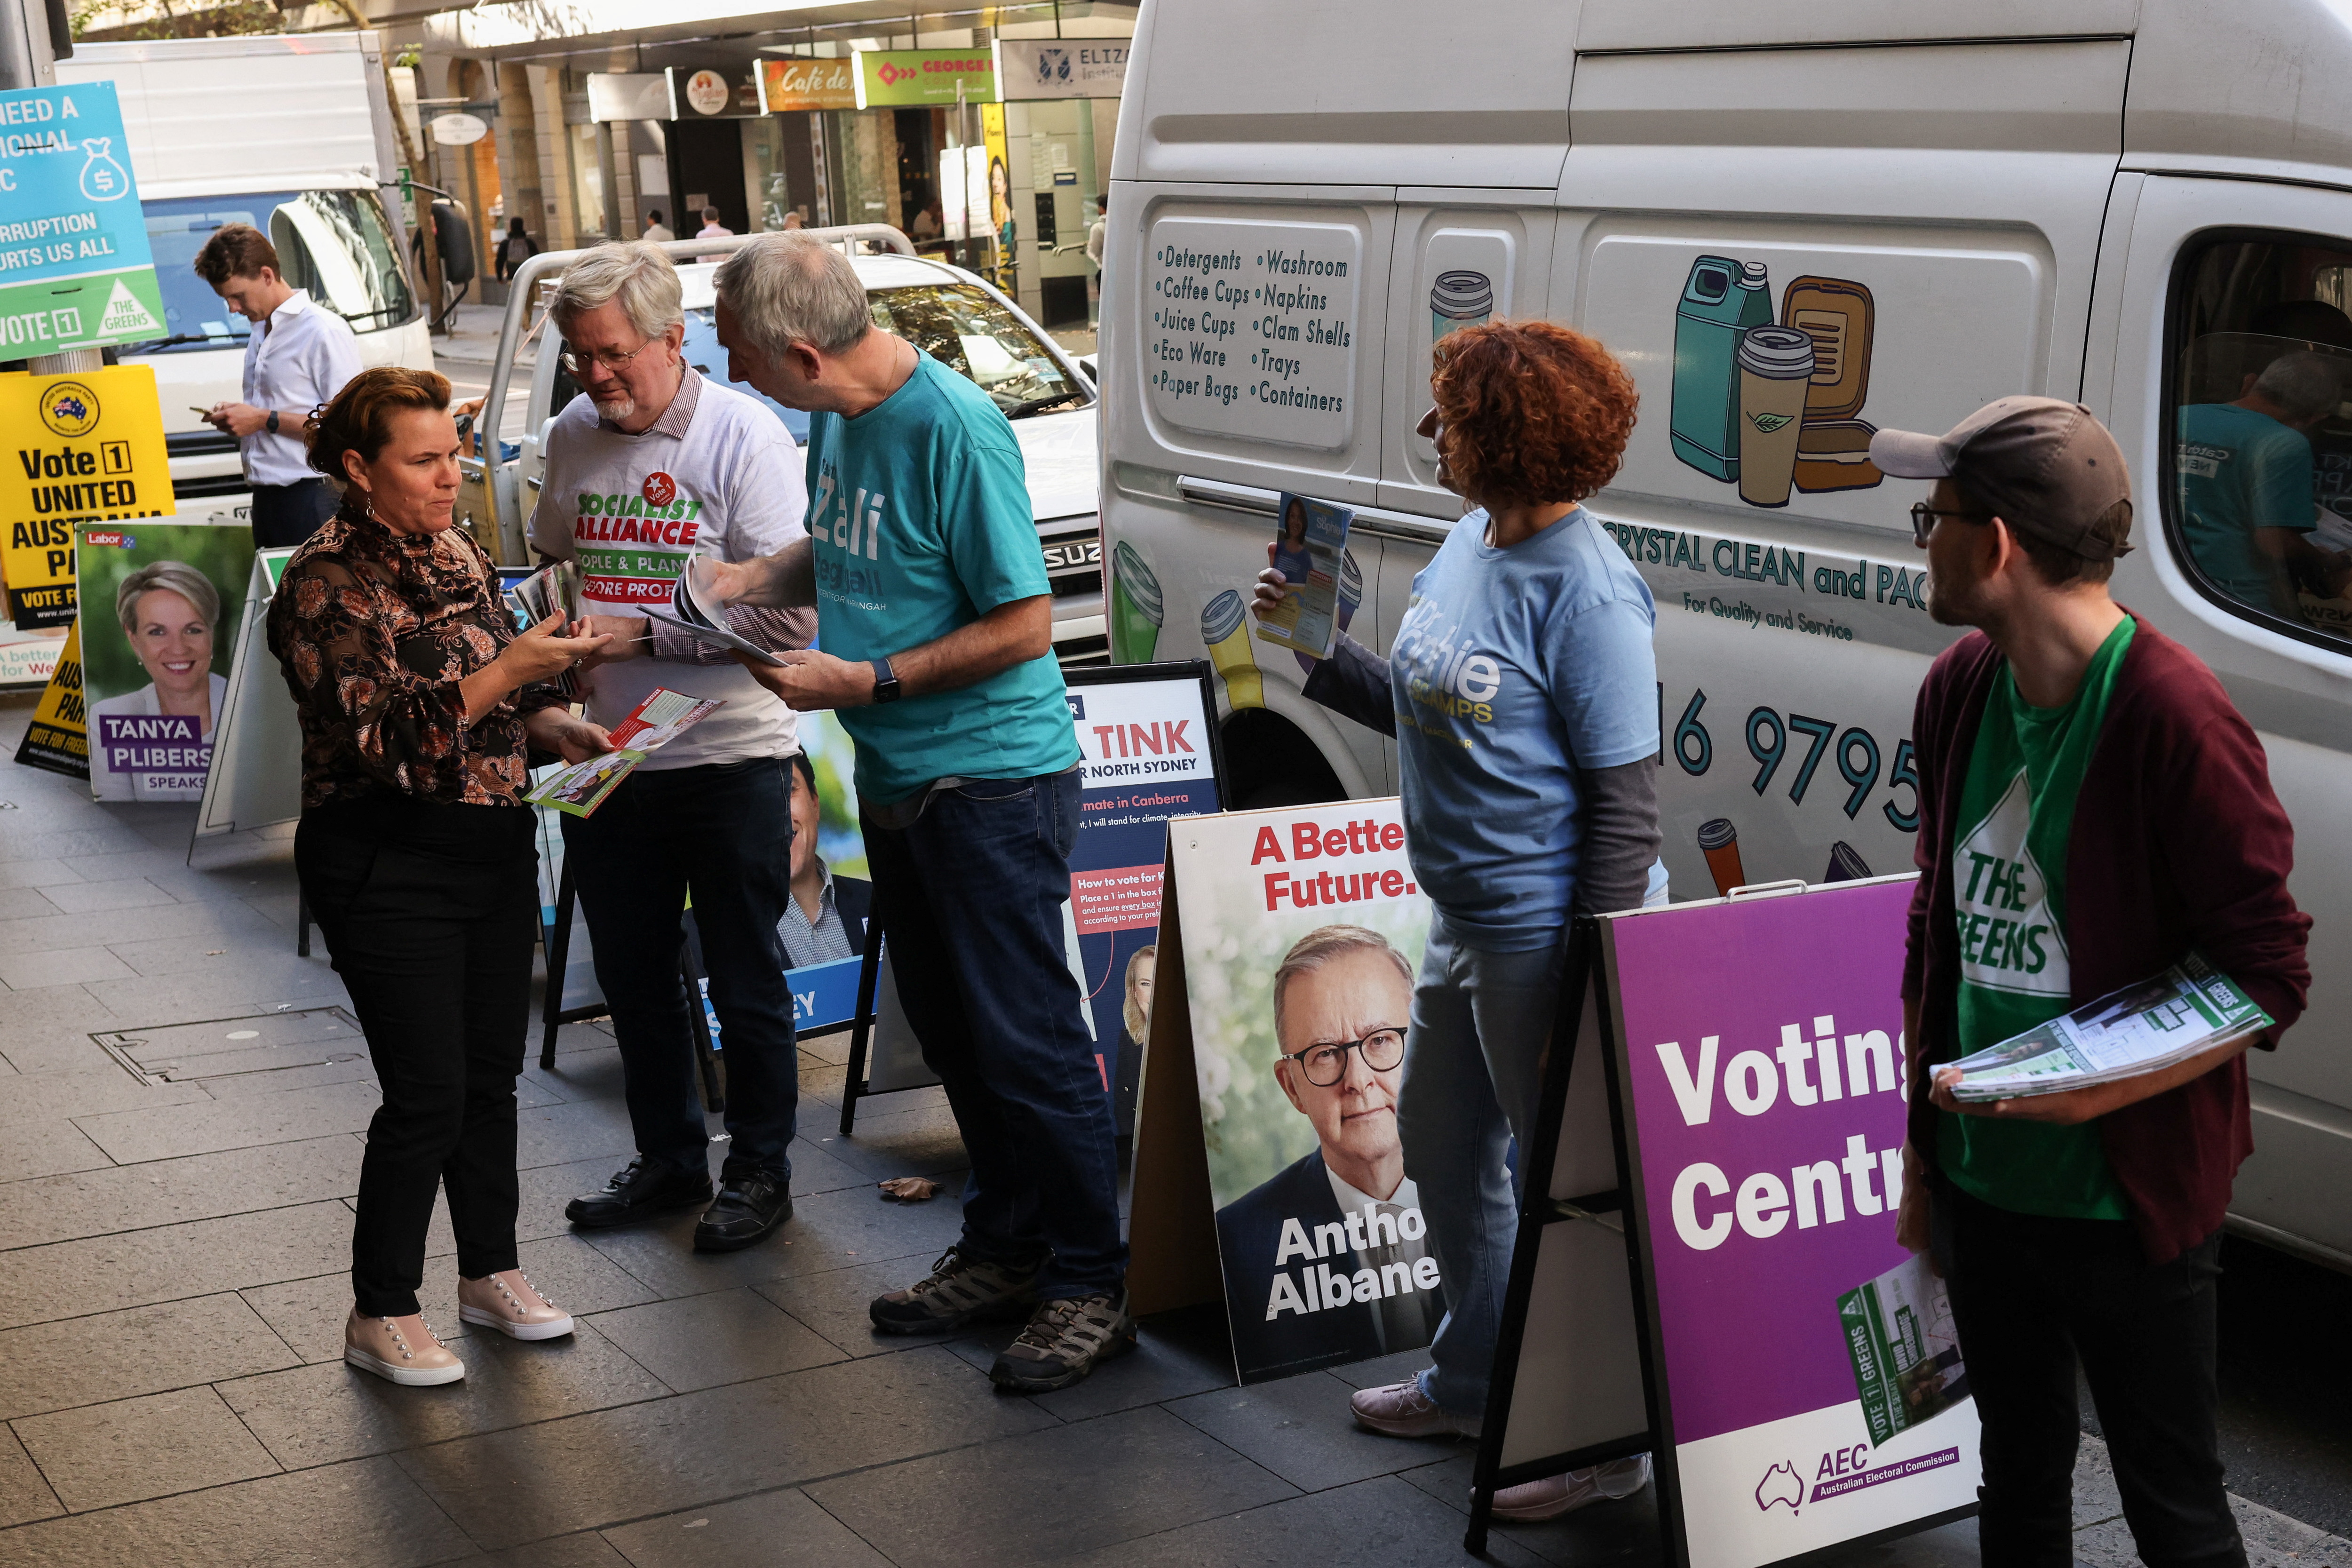 The scene at an AEC early voting centre ahead of the national election in Sydney